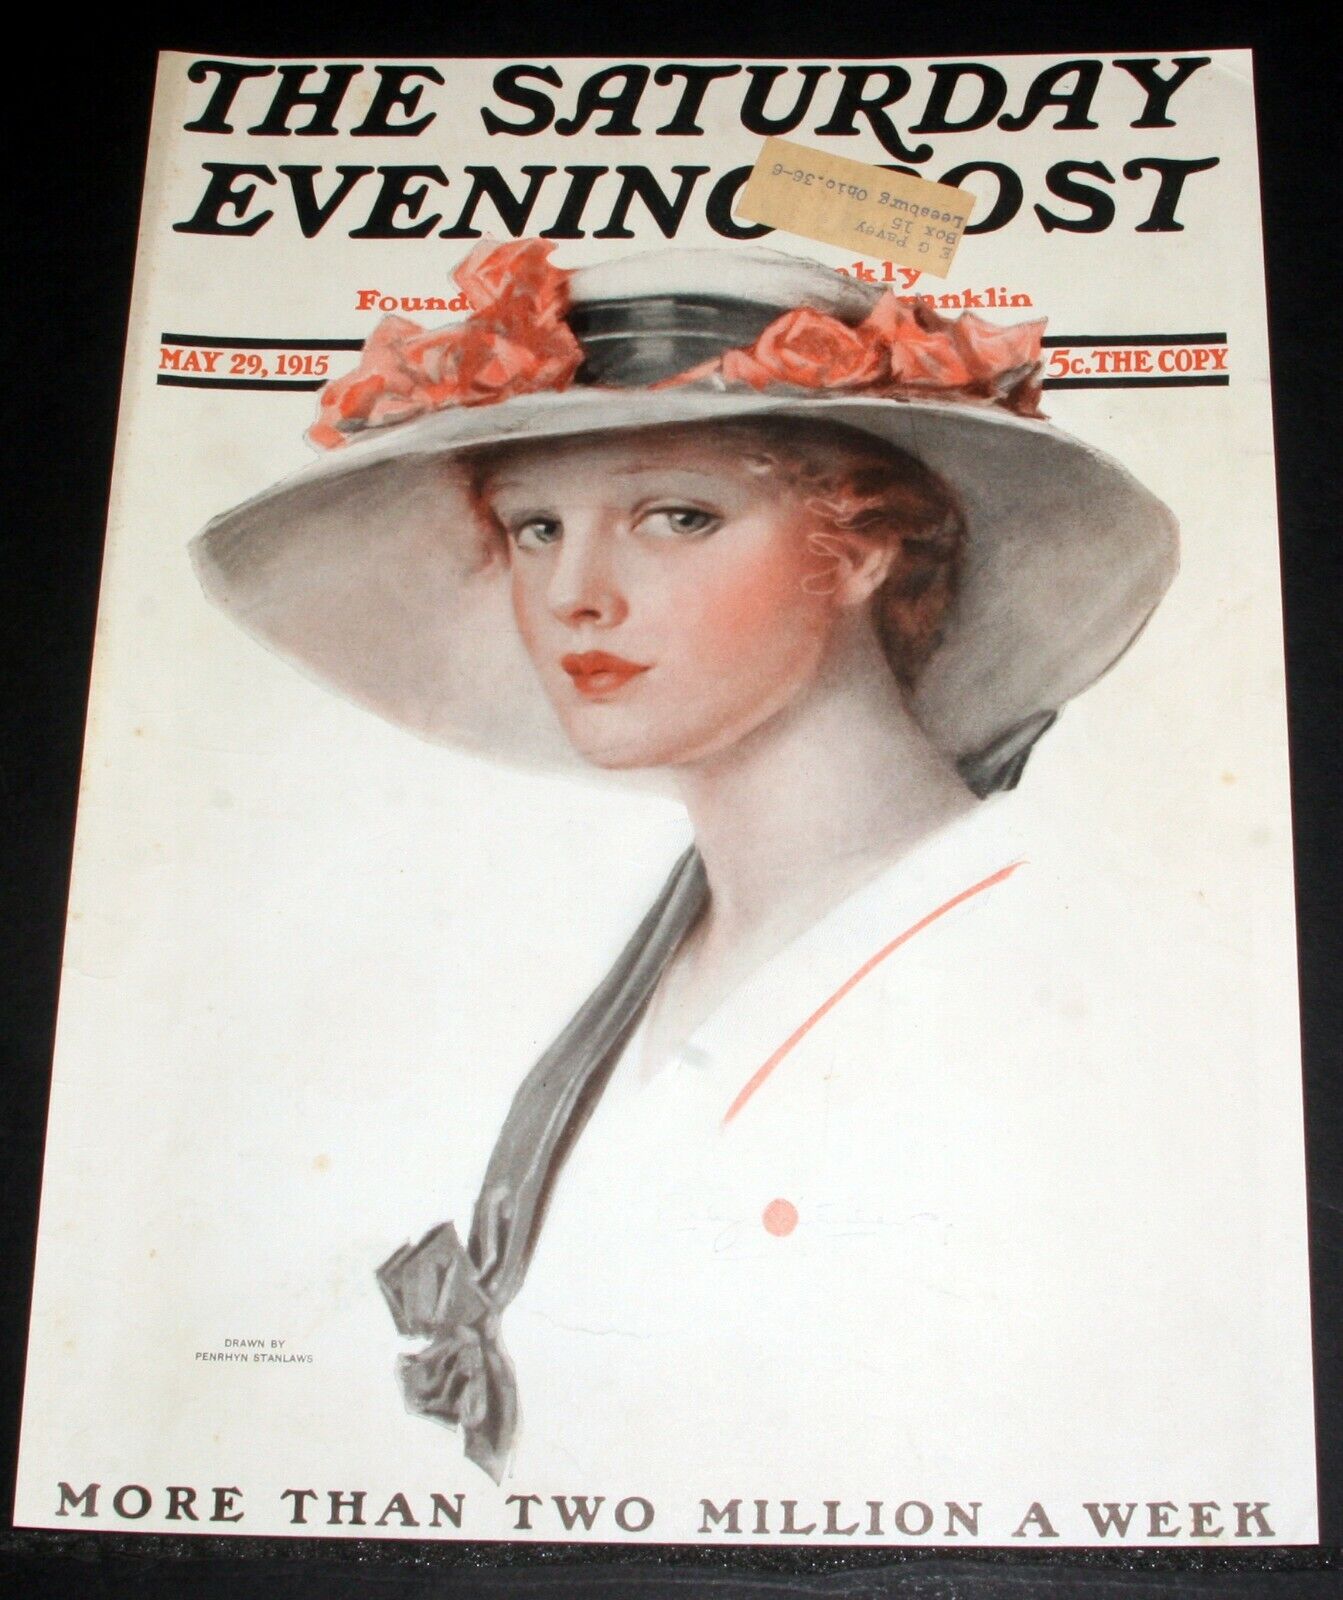 1915 OLD SATURDAY EVENING POST MAGAZINE COVER, MAY 29, PENRHYN STANLAWS ART